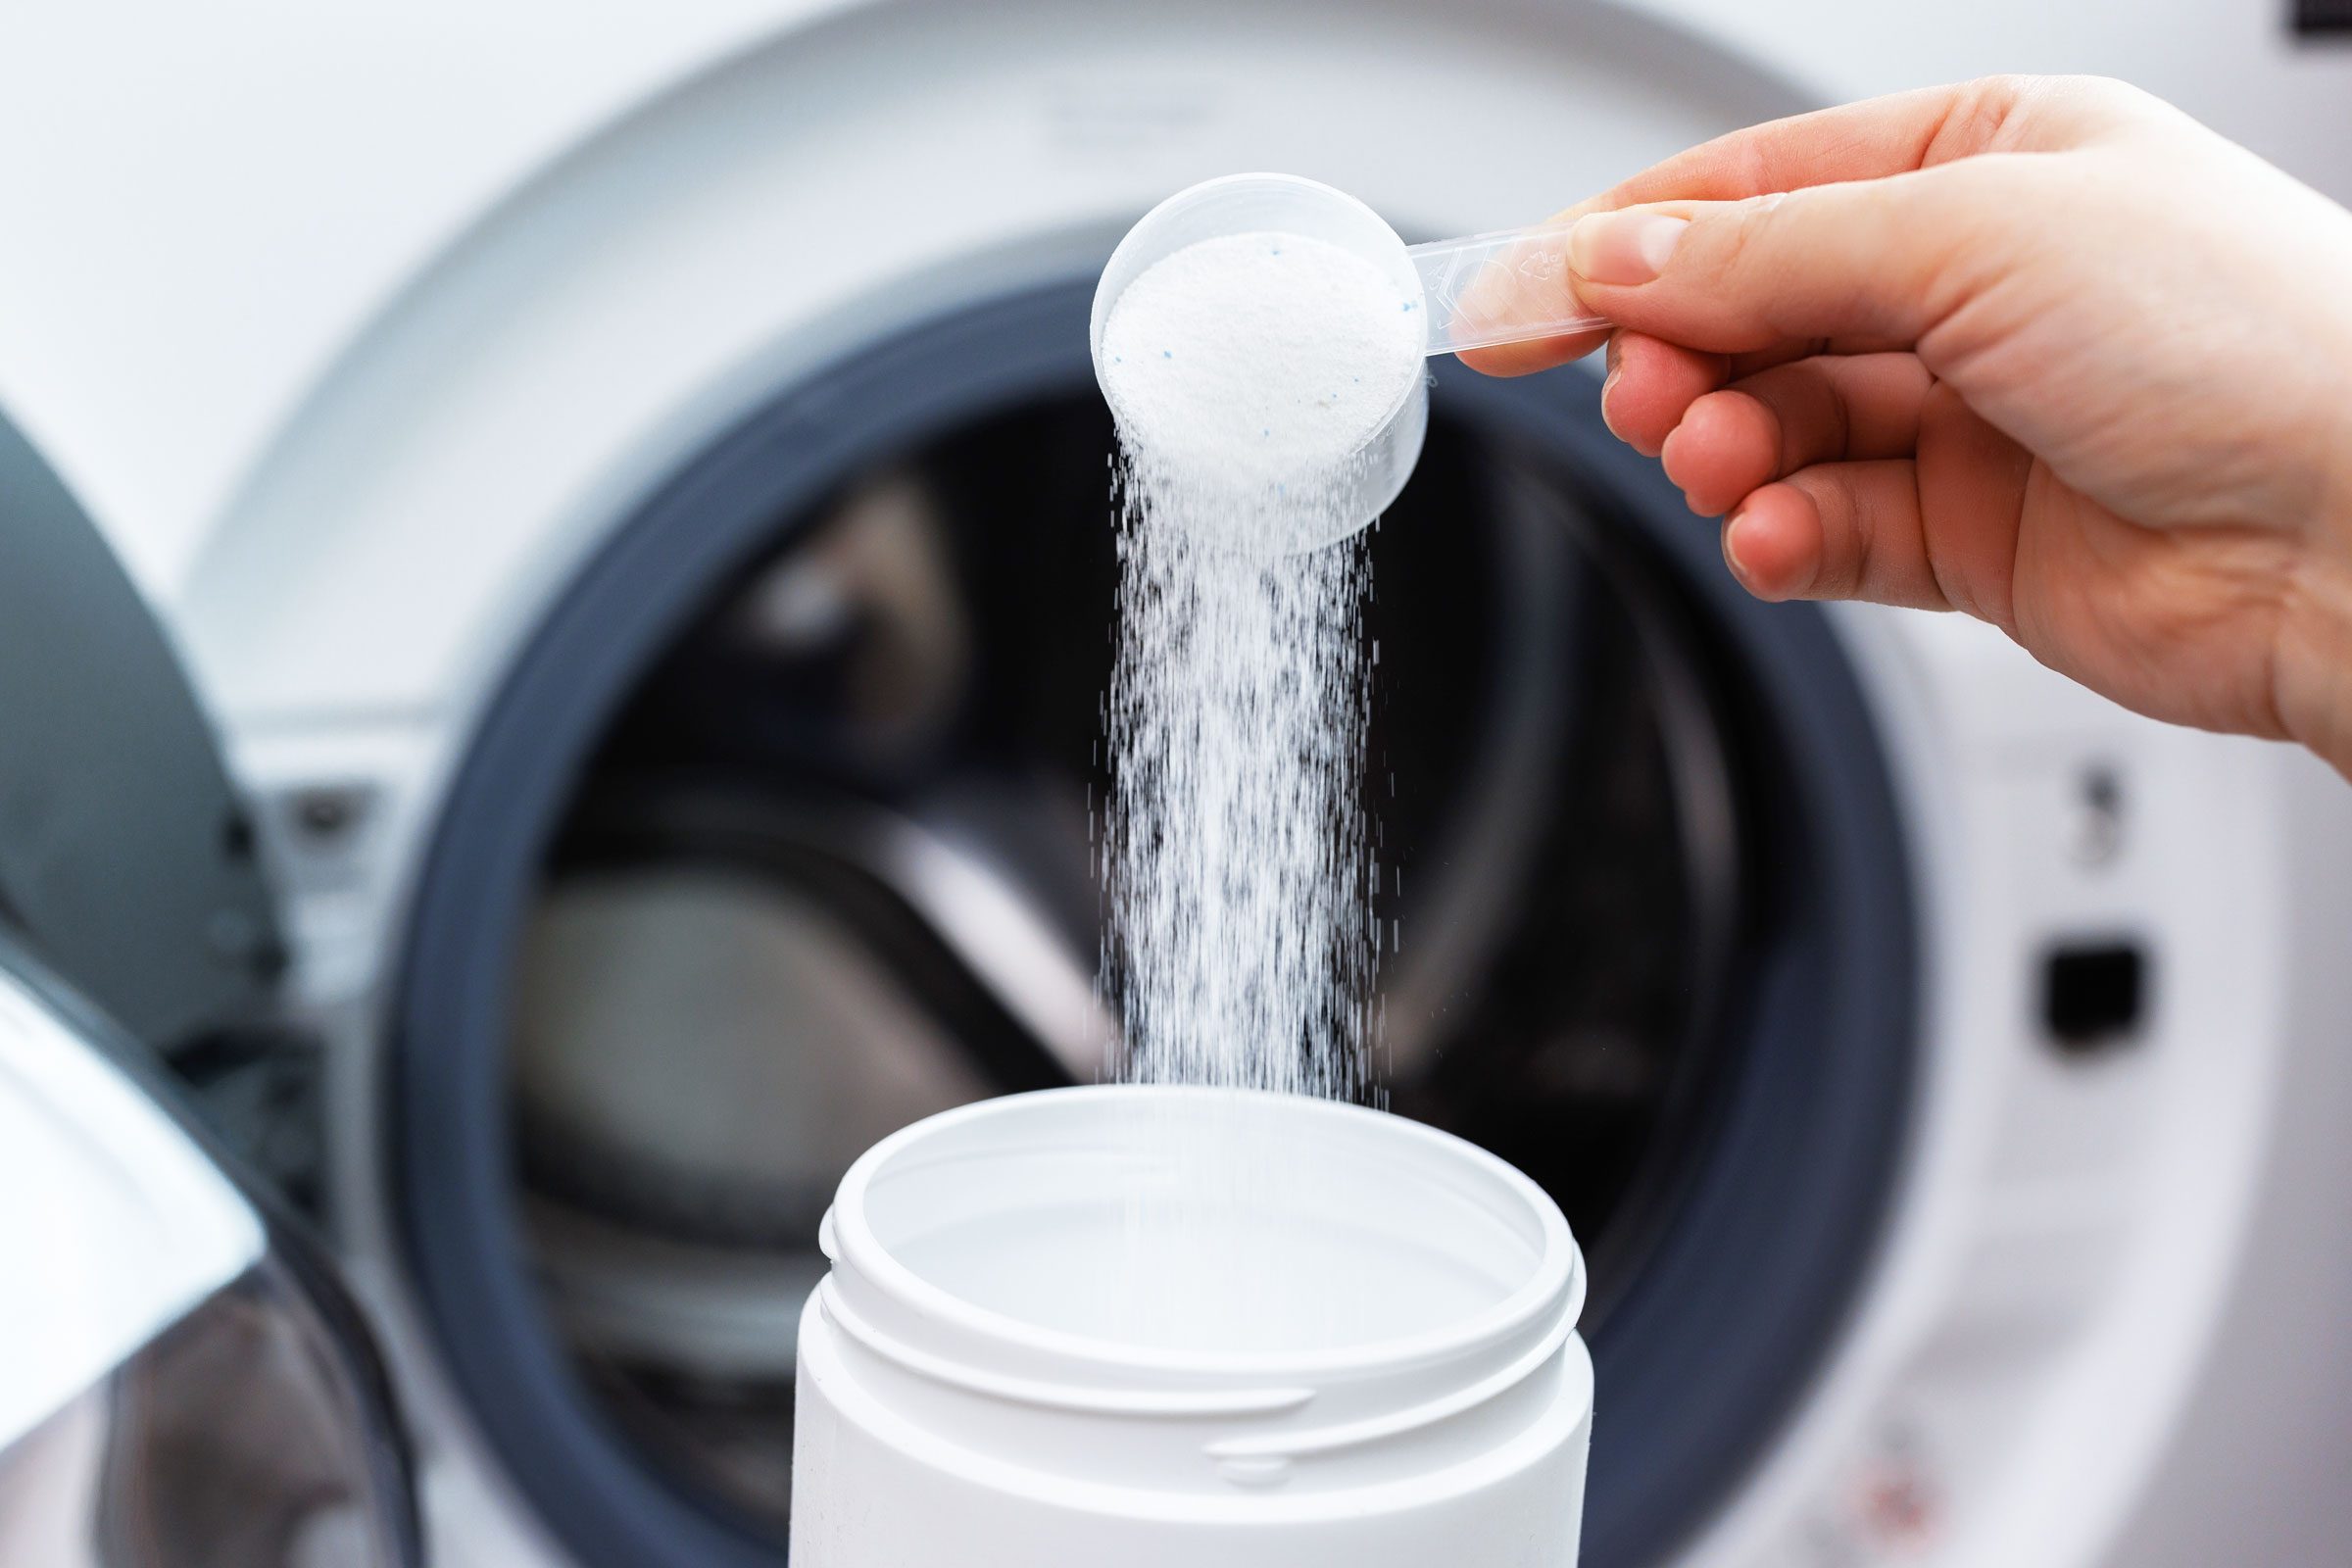 How to Use Bleach in Laundry Safely